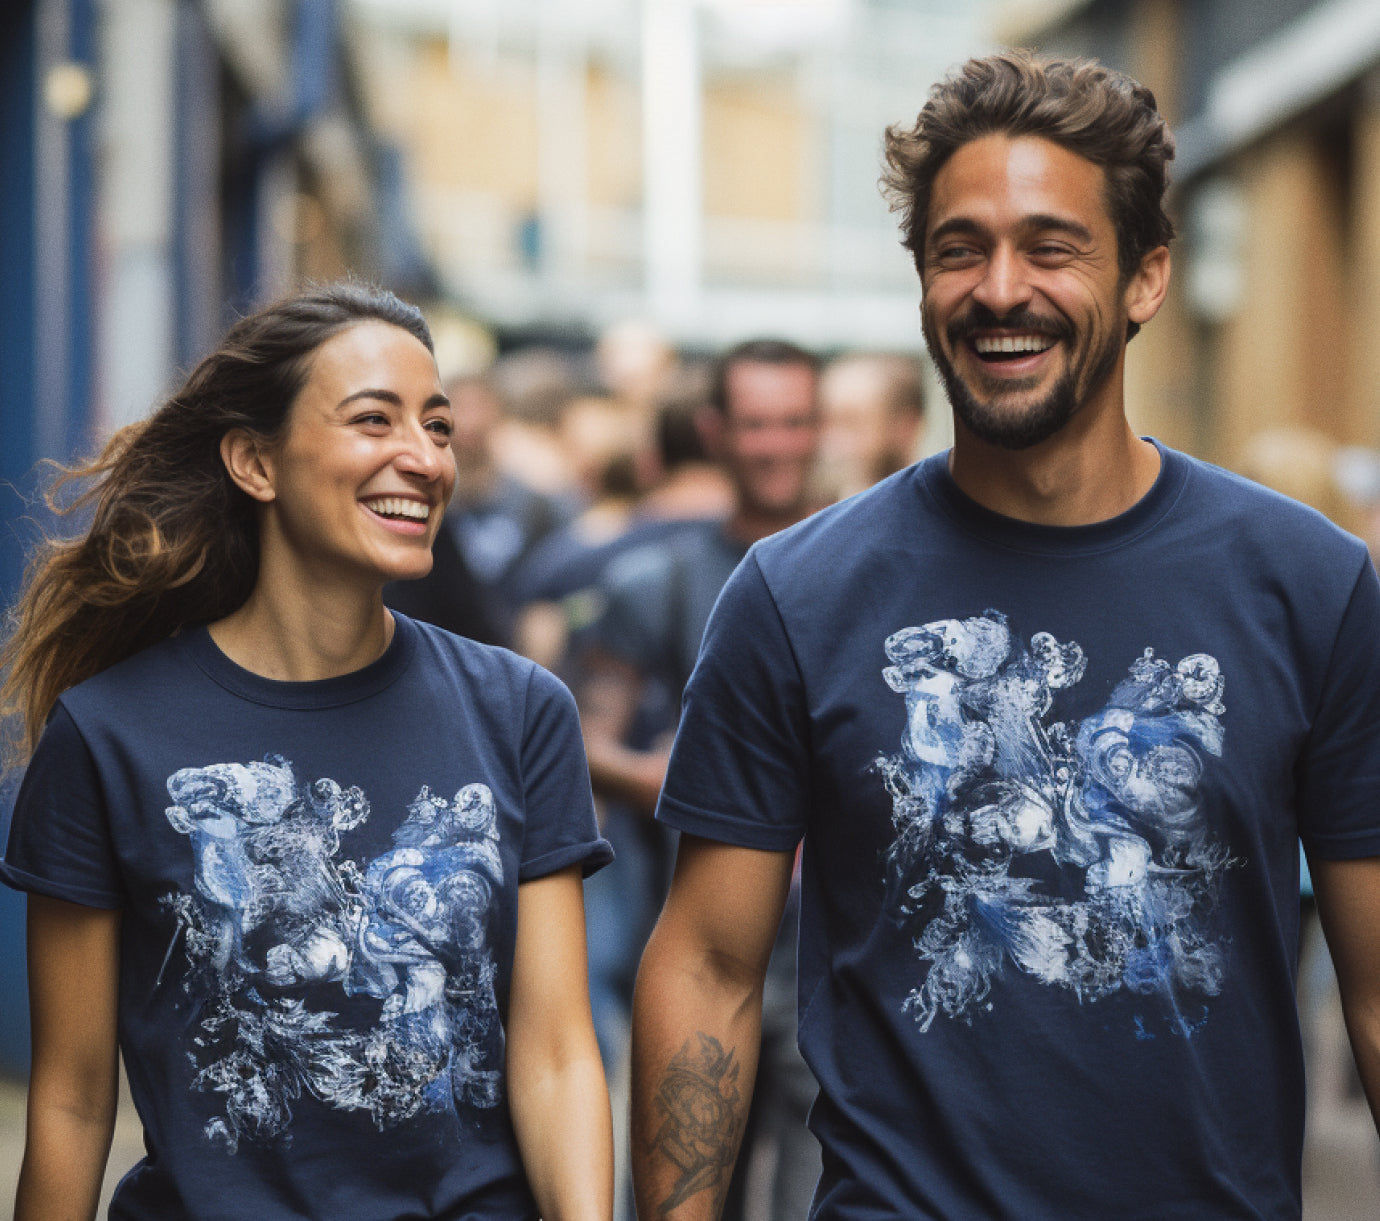 a man and woman walking together in matching t-shirts smiling